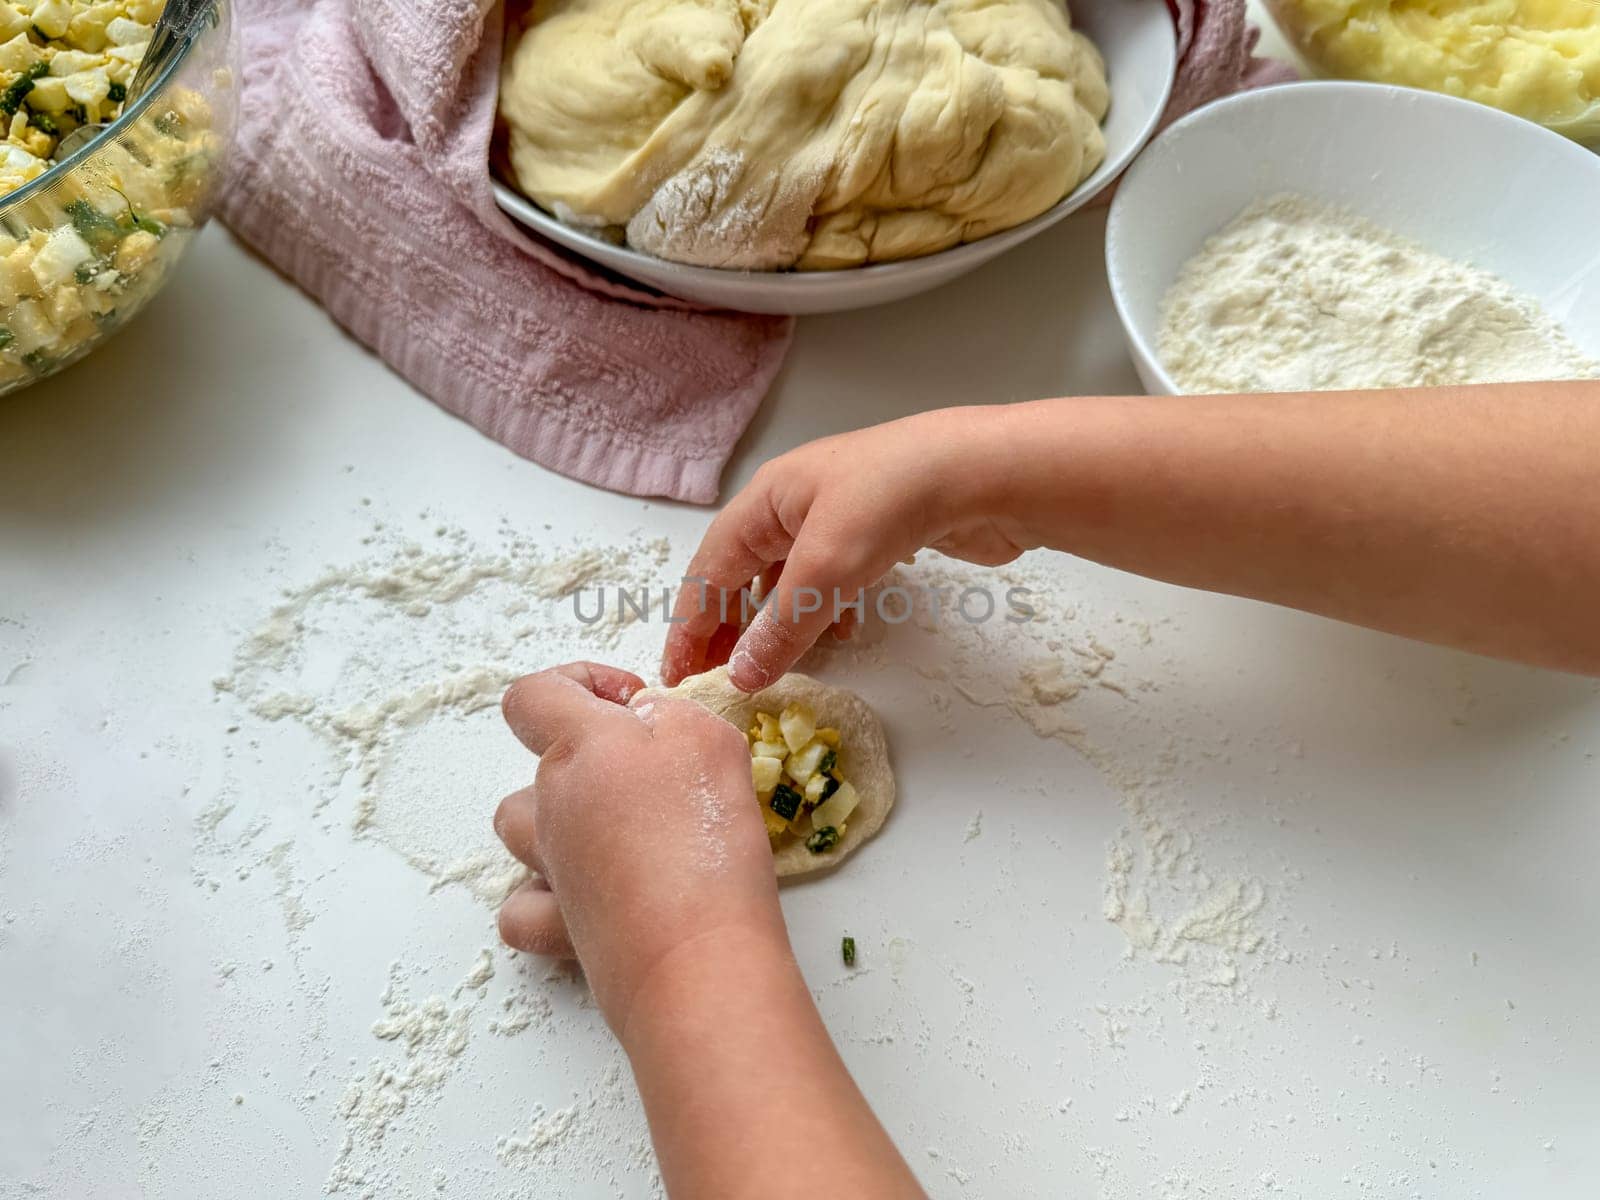 The hands of child knead the dough for making pies on white table, top view. High quality photo